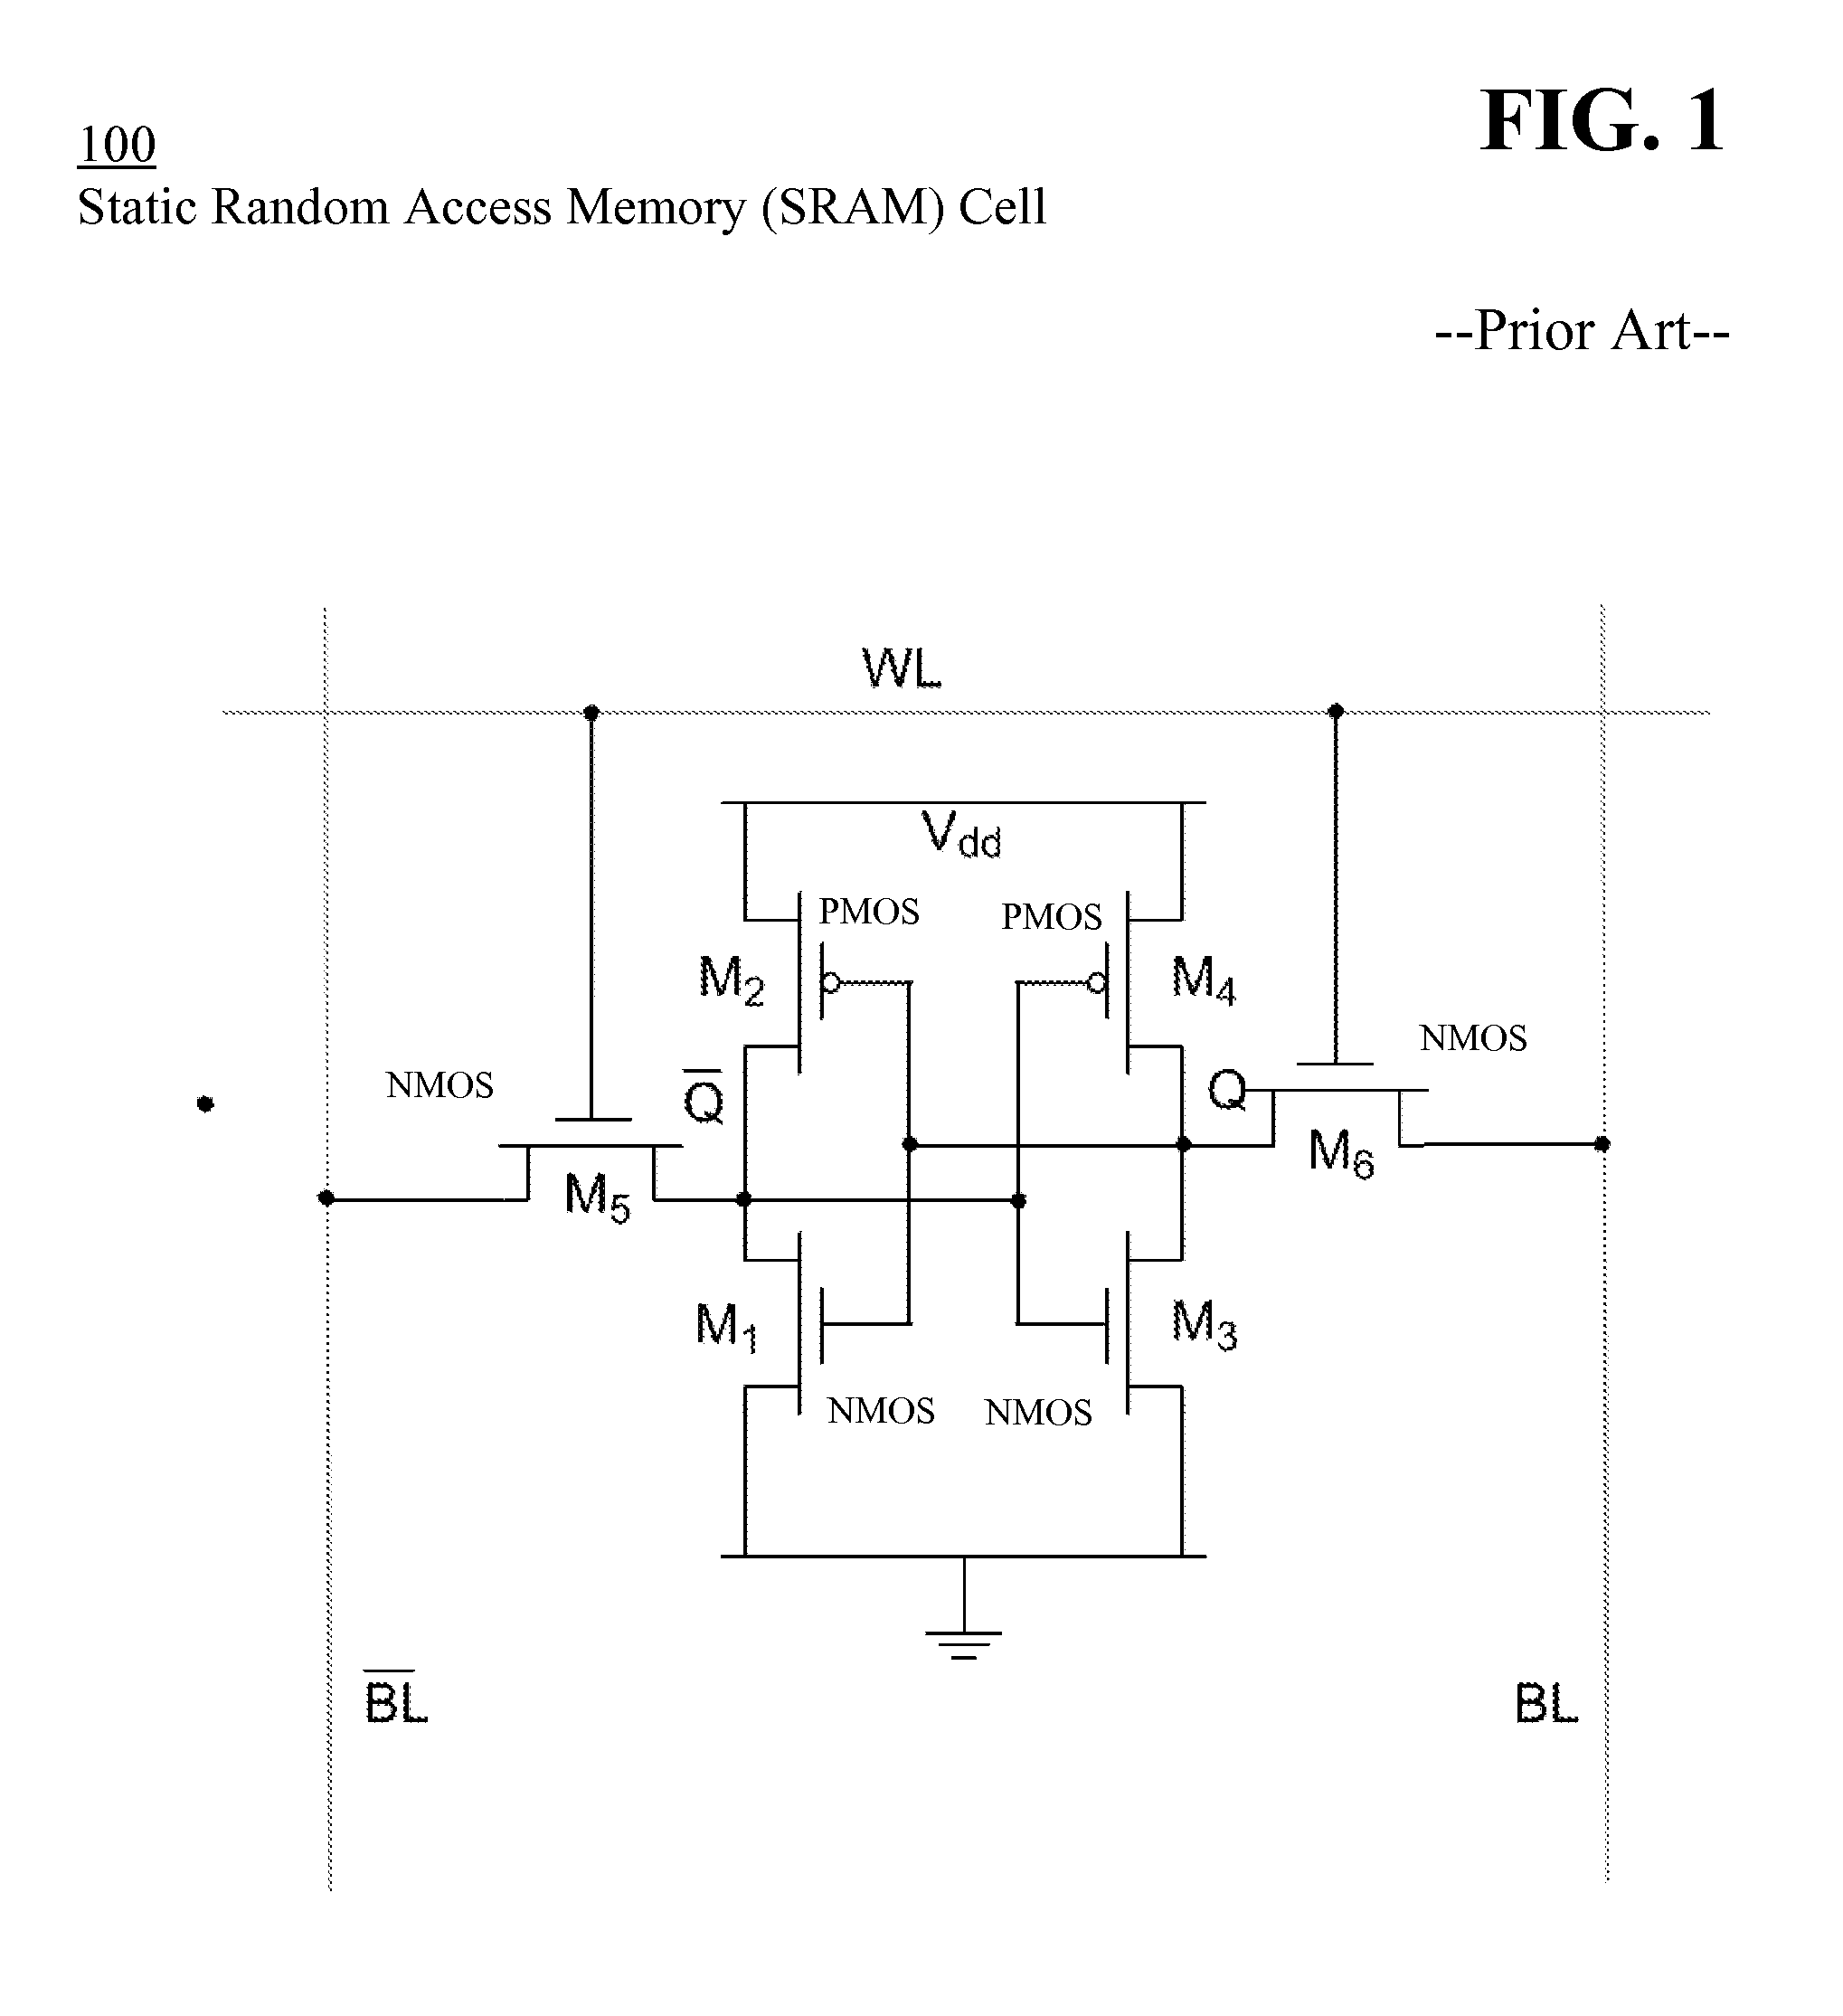 Testing a memory device having field effect transistors subject to threshold voltage shifts caused by bias temperature instability